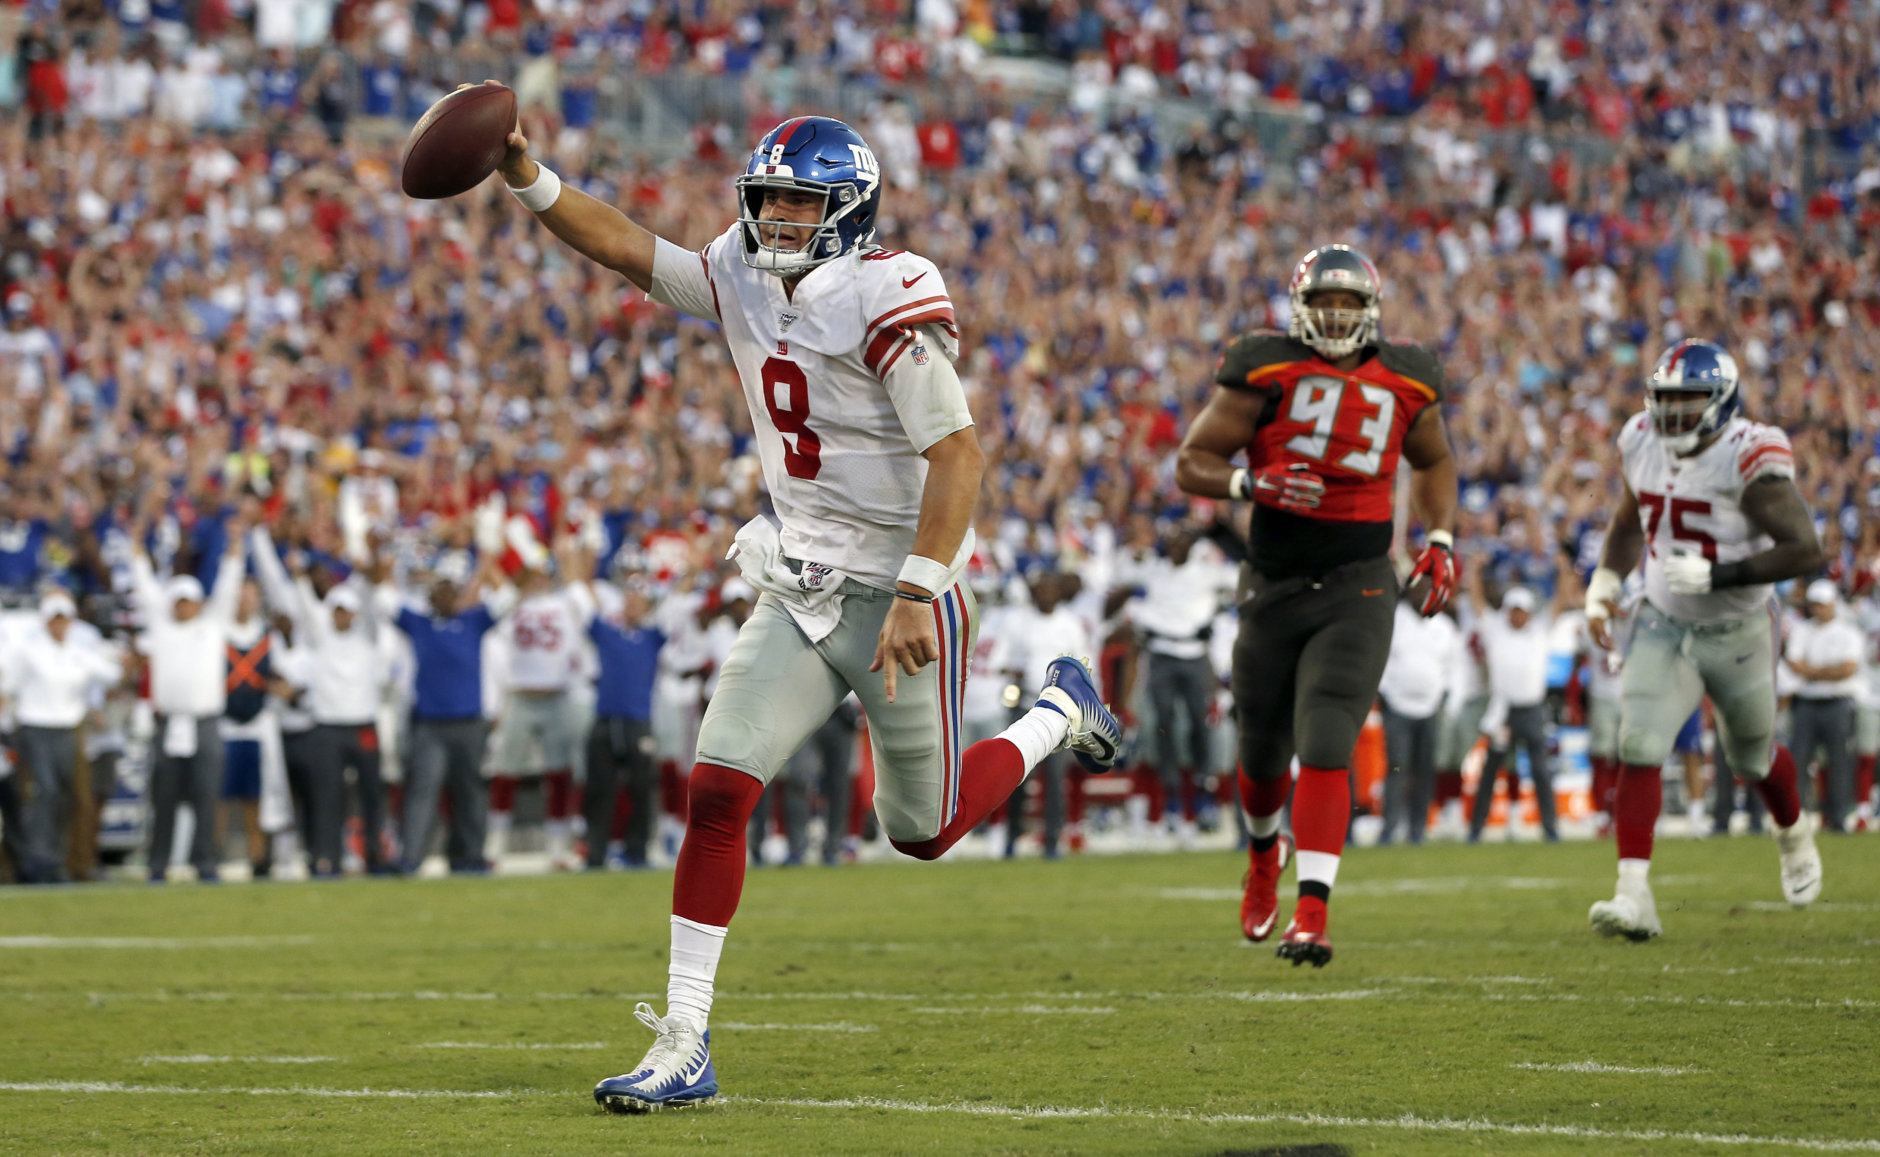 <p><b><i>Giants 32</i></b><br />
<b><i>Bucs 31</i></b></p>
<p>Daniel Jones told us <a href="https://profootballtalk.nbcsports.com/2019/09/18/daniel-jones-i-feel-ready/" target="_blank" rel="noopener" data-saferedirecturl="https://www.google.com/url?q=https://profootballtalk.nbcsports.com/2019/09/18/daniel-jones-i-feel-ready/&amp;source=gmail&amp;ust=1569294743340000&amp;usg=AFQjCNEAYl4FuCN7z3mcRFb6wS4ItCIlLg">he&#8217;s ready</a>, and boy was he. Jones engineered an 18-point comeback — the second largest since 1970 for a QB starting his first game — and became the first Giant with two passing touchdowns and two rushing scores in a single game. If he can keep this up against stiffer competition and without the <a href="https://www.espn.com/nfl/story/_/id/27678892/sources-giants-rb-barkley-high-ankle-sprain" target="_blank" rel="noopener">injured Saquon Barkley</a>, Dave Gettleman might actually know what he&#8217;s doing after all.</p>
